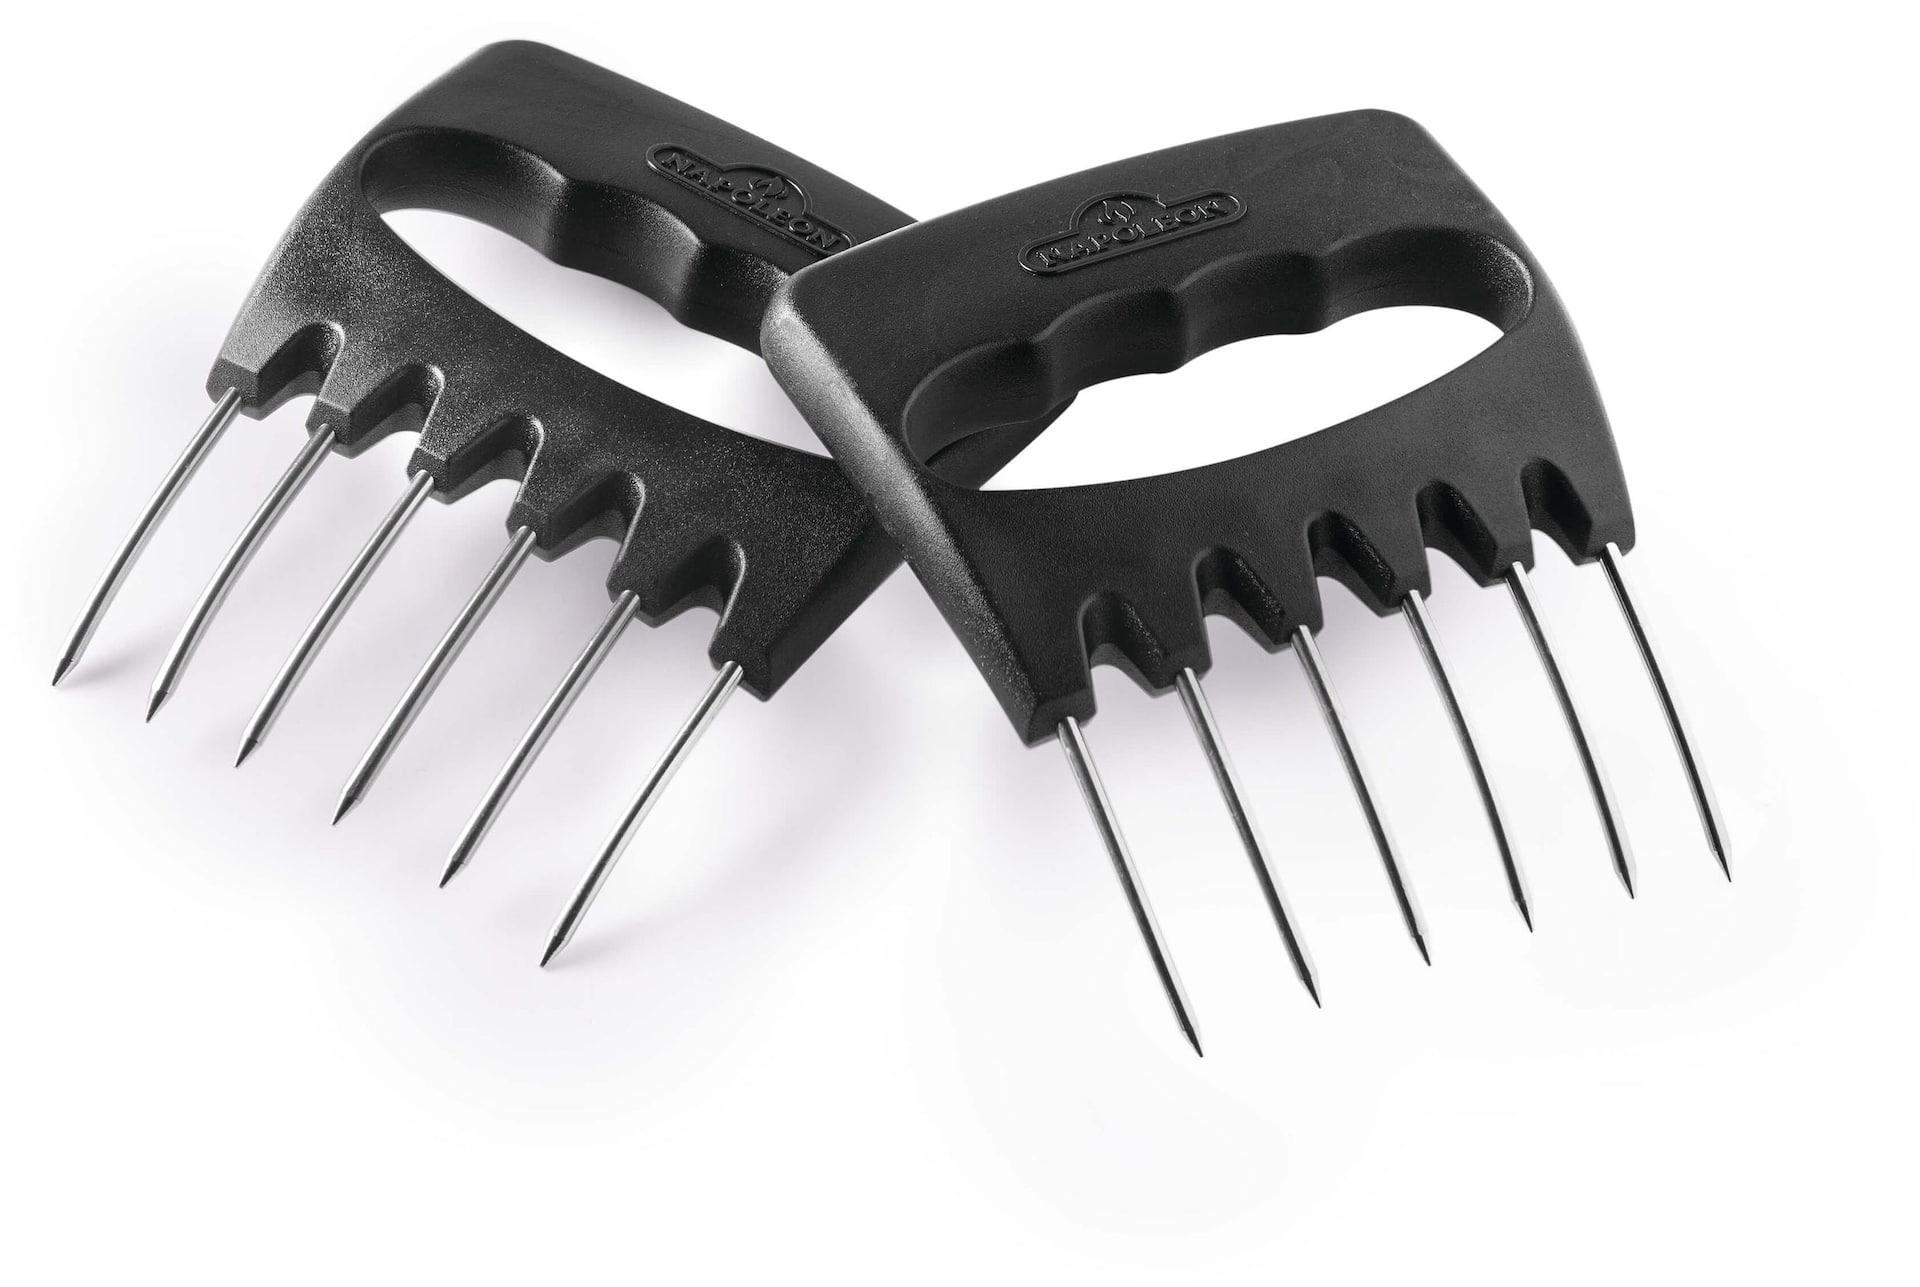 Napoleon 70043 - Multi-Use Stainless Steel Meat Shredder Claws, 2